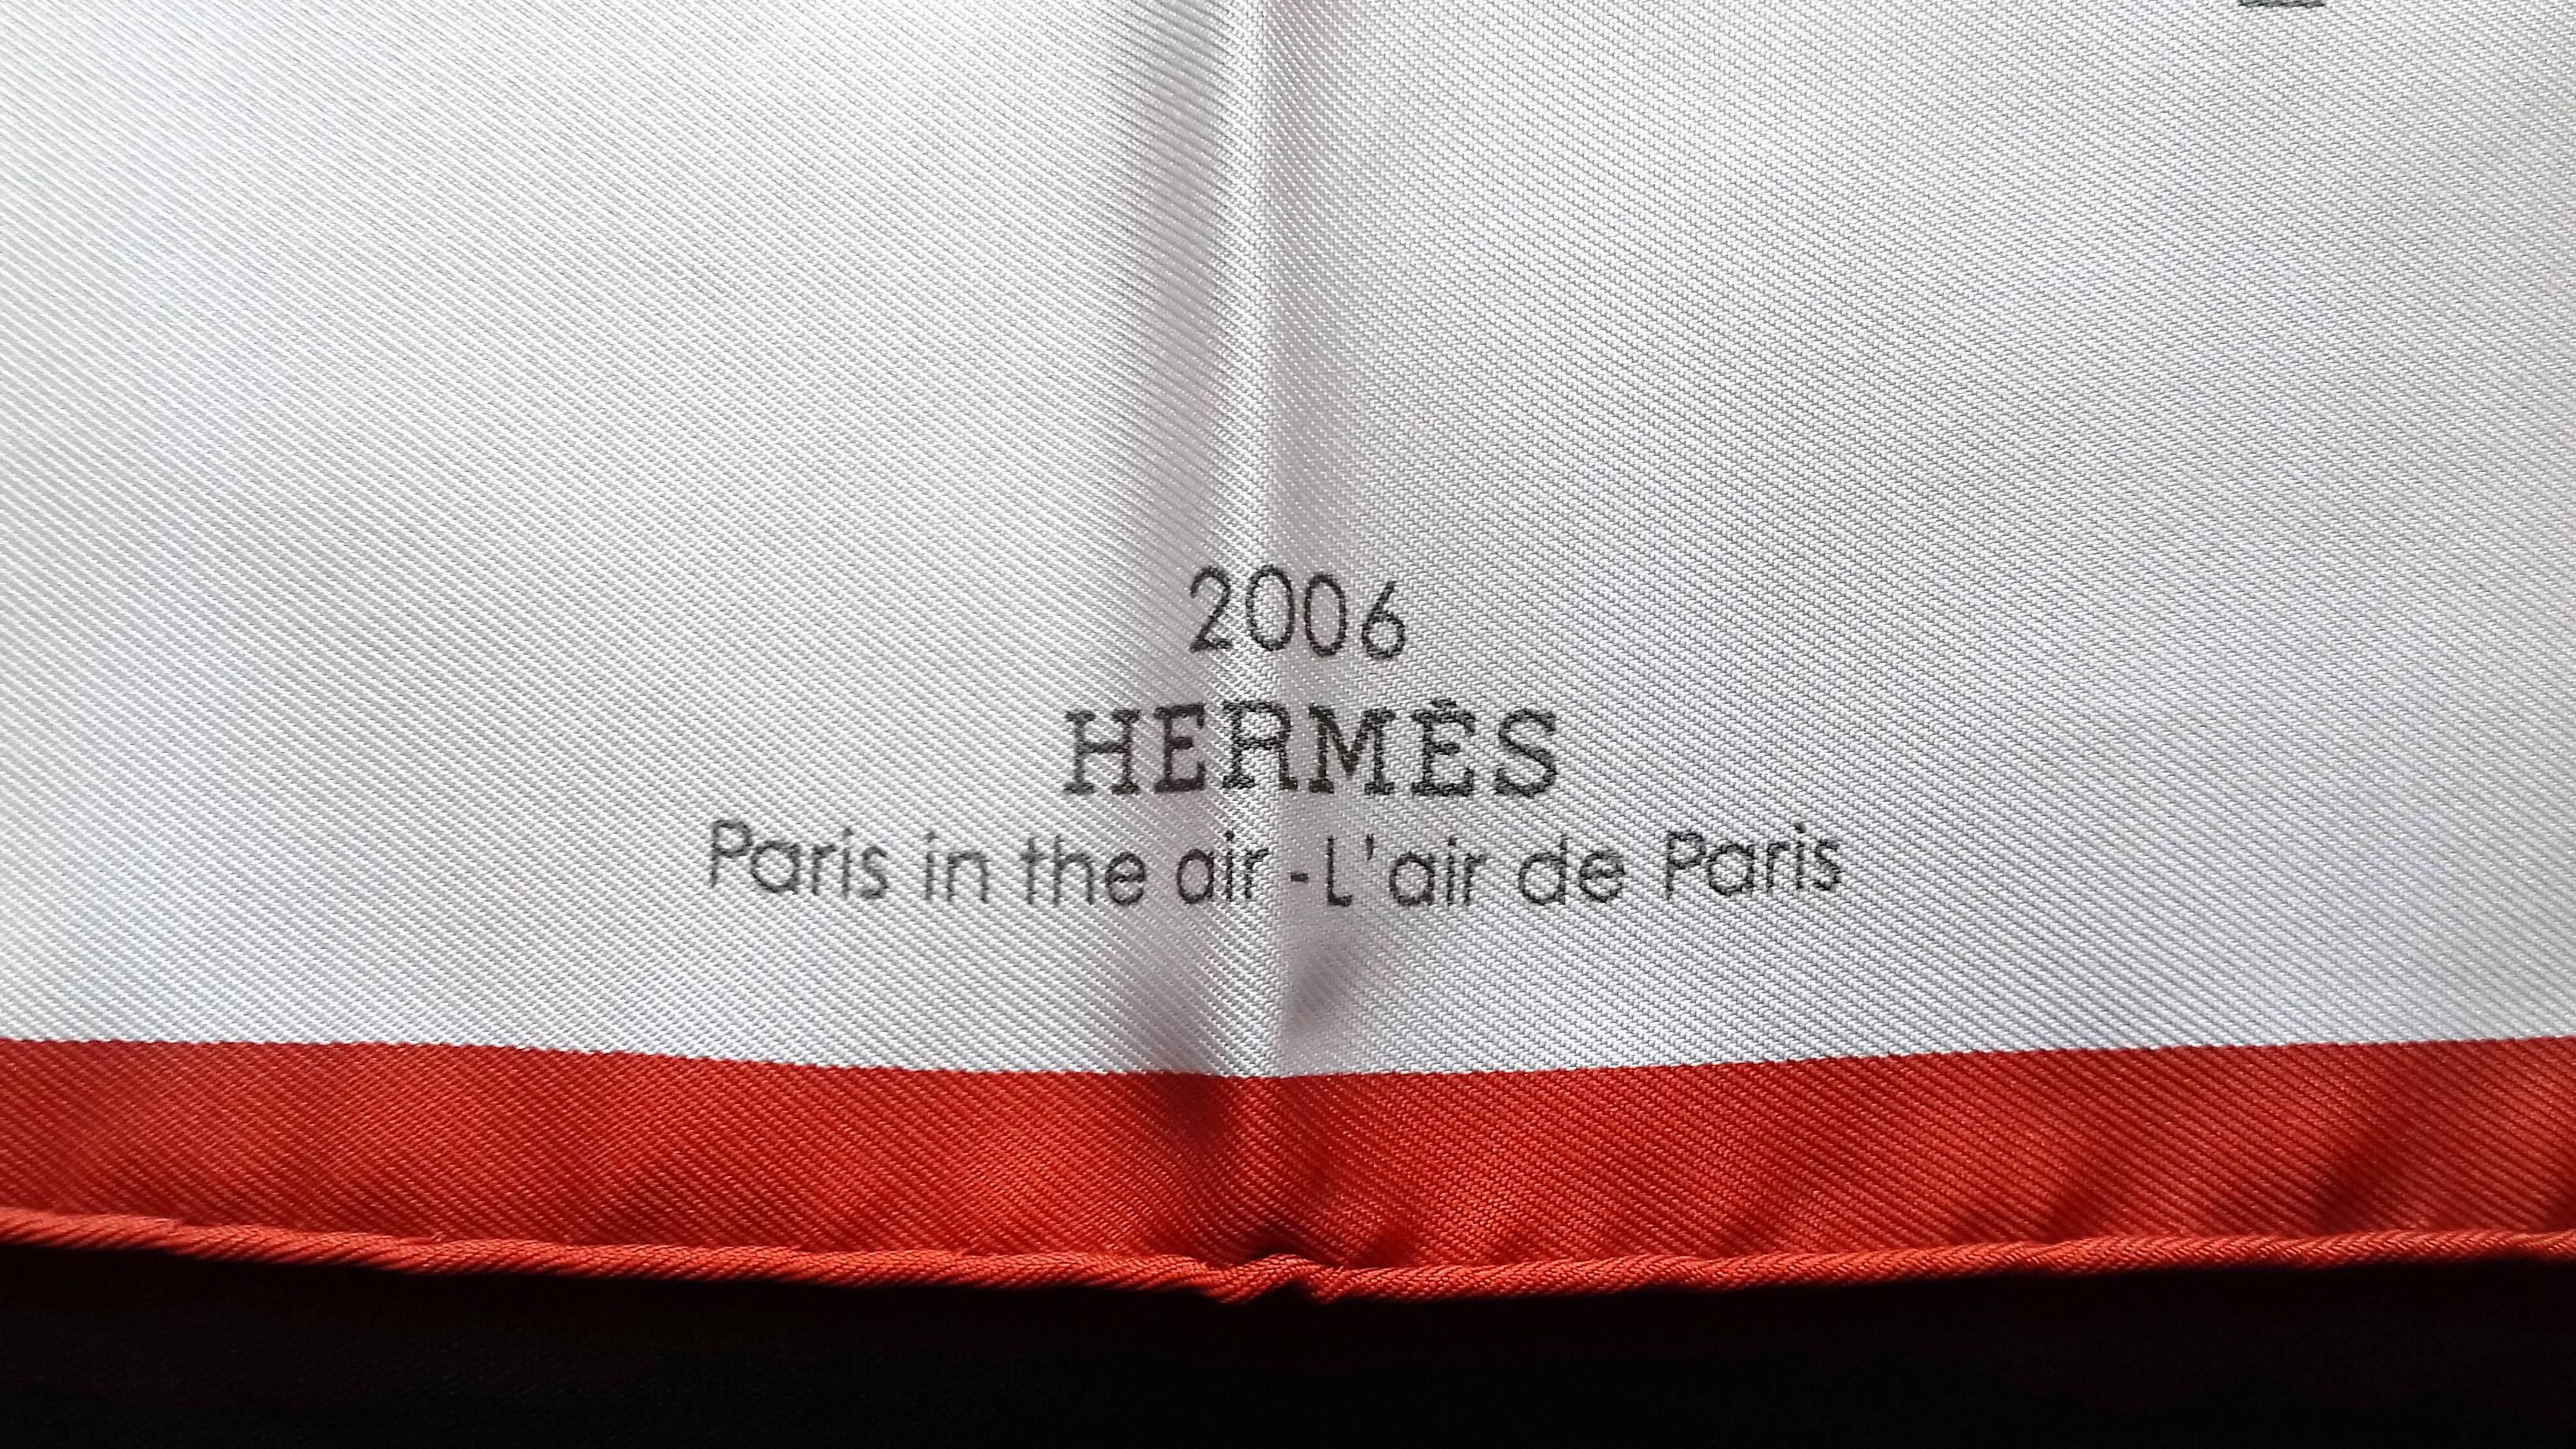 Limited Edition Authentic Hermès Scarf

